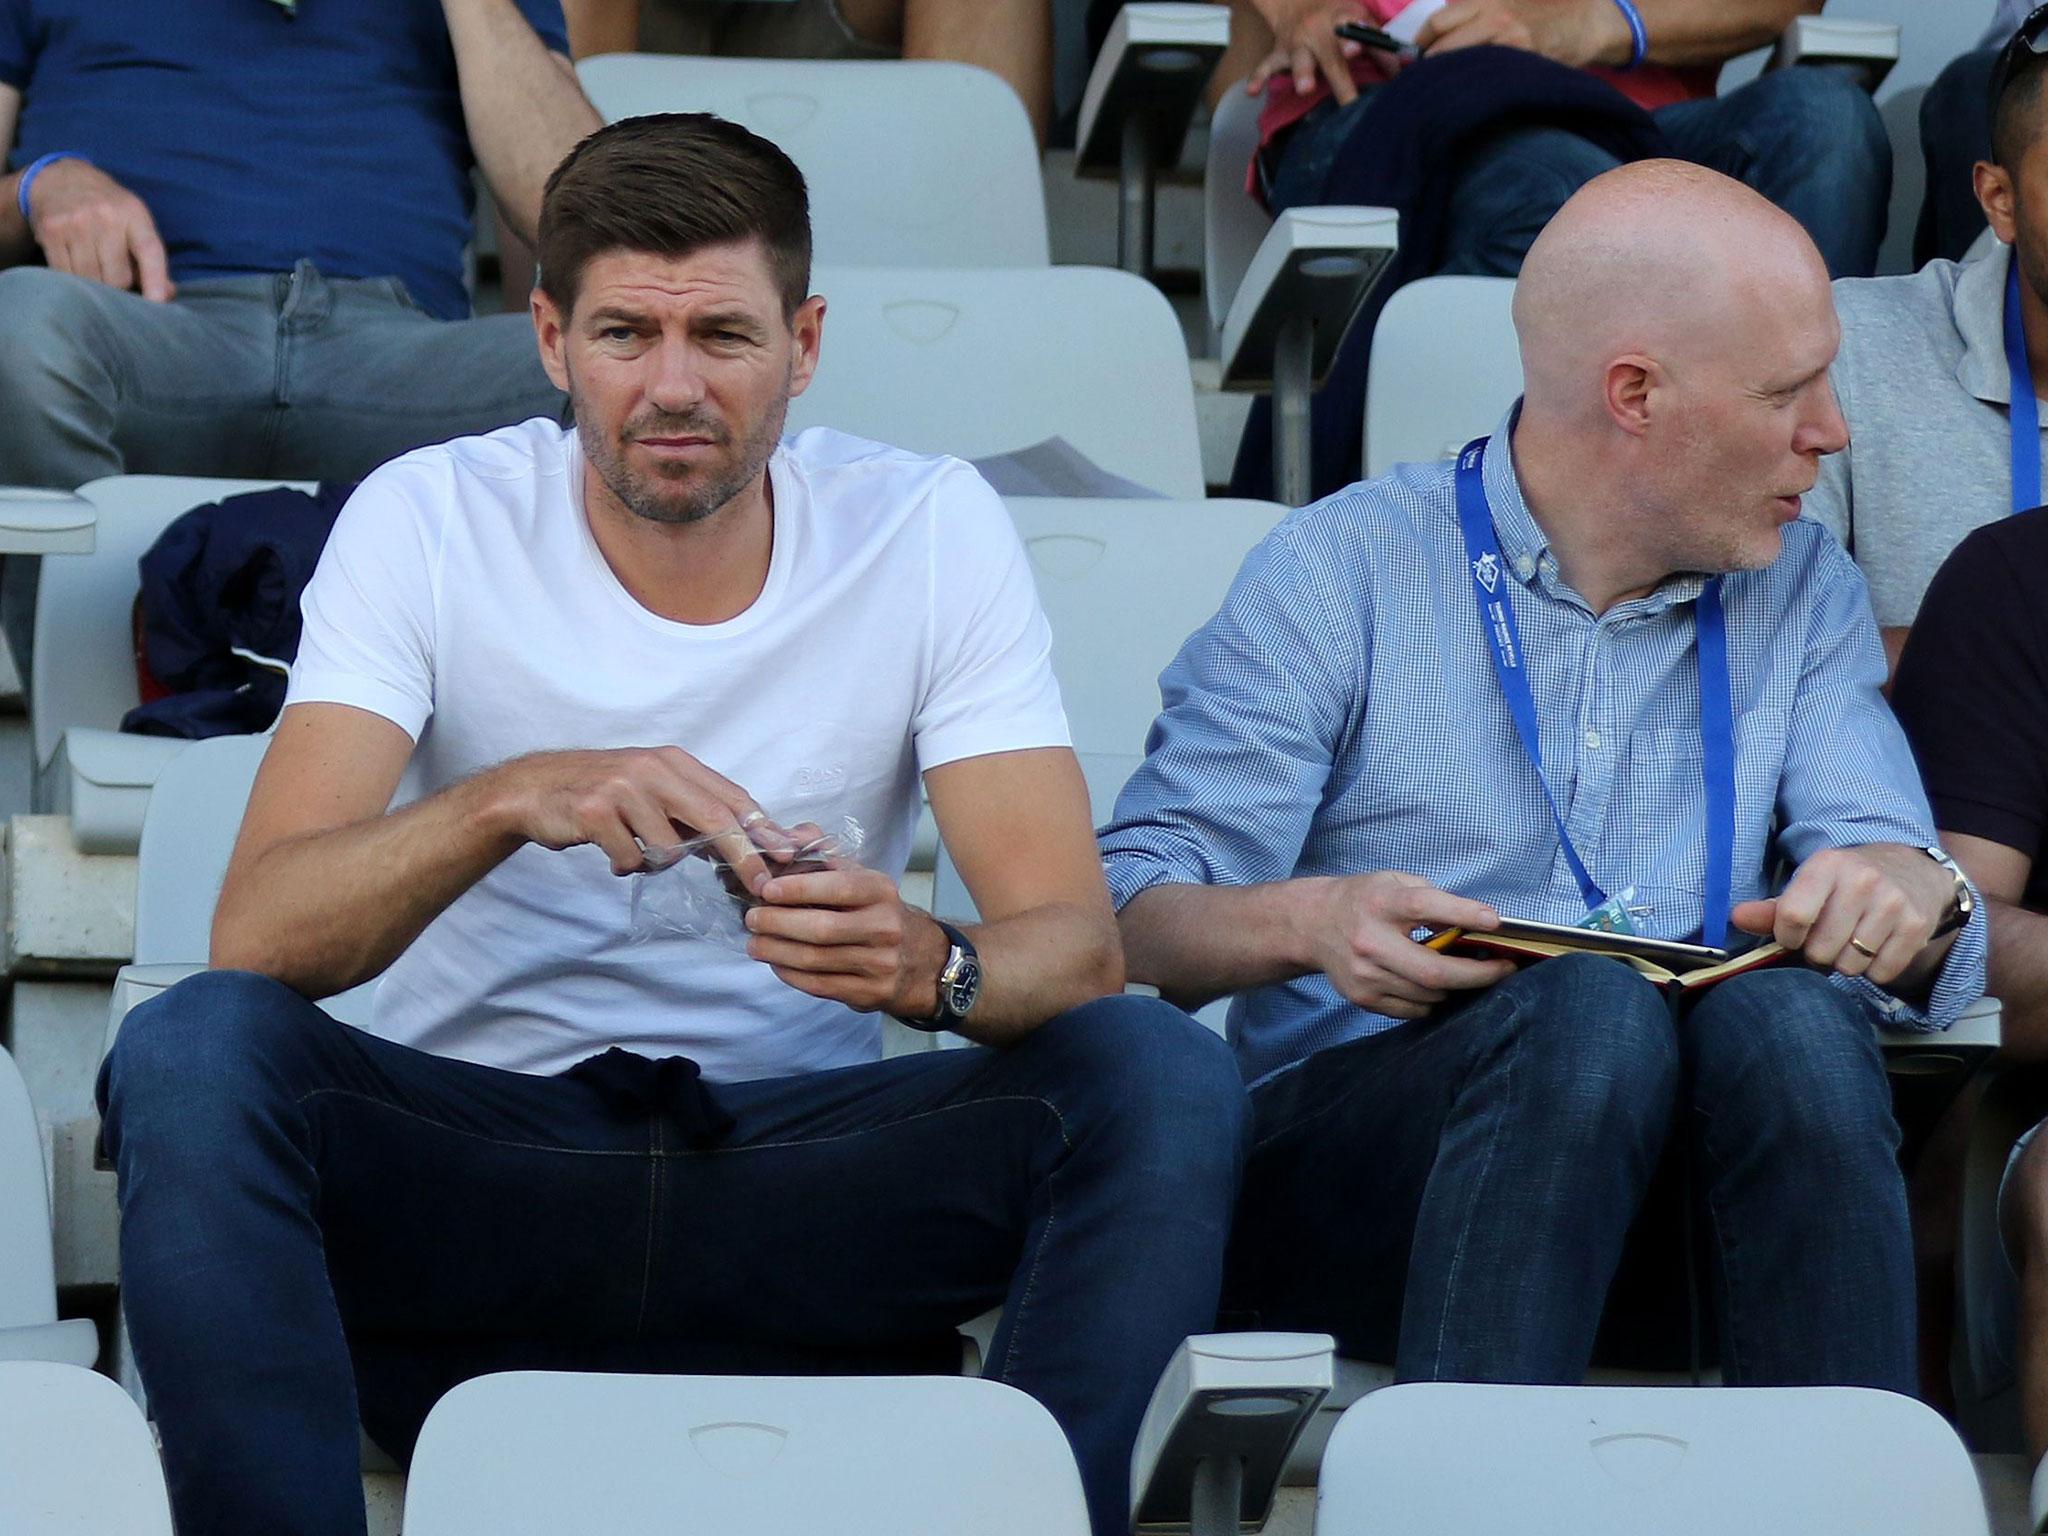 Gerrard was in France to watch the Toulon tournament